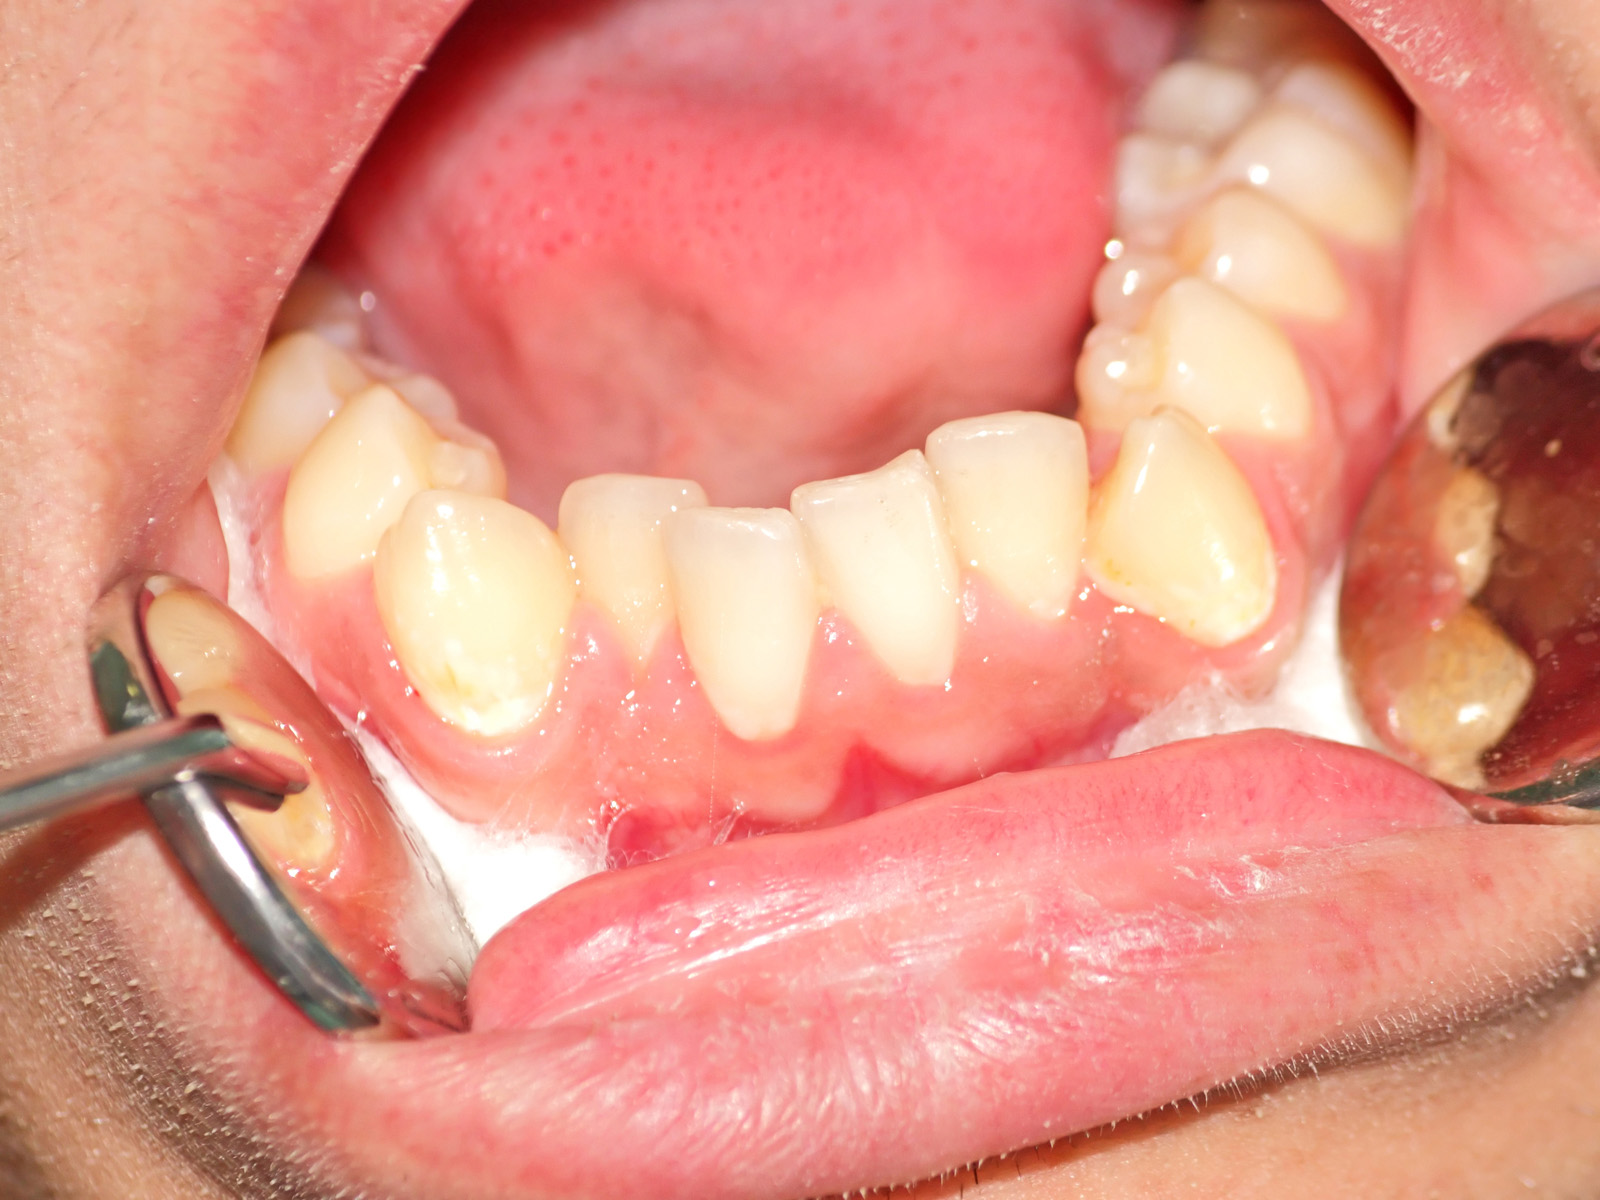 What is a bicuspid in relation to dental health?